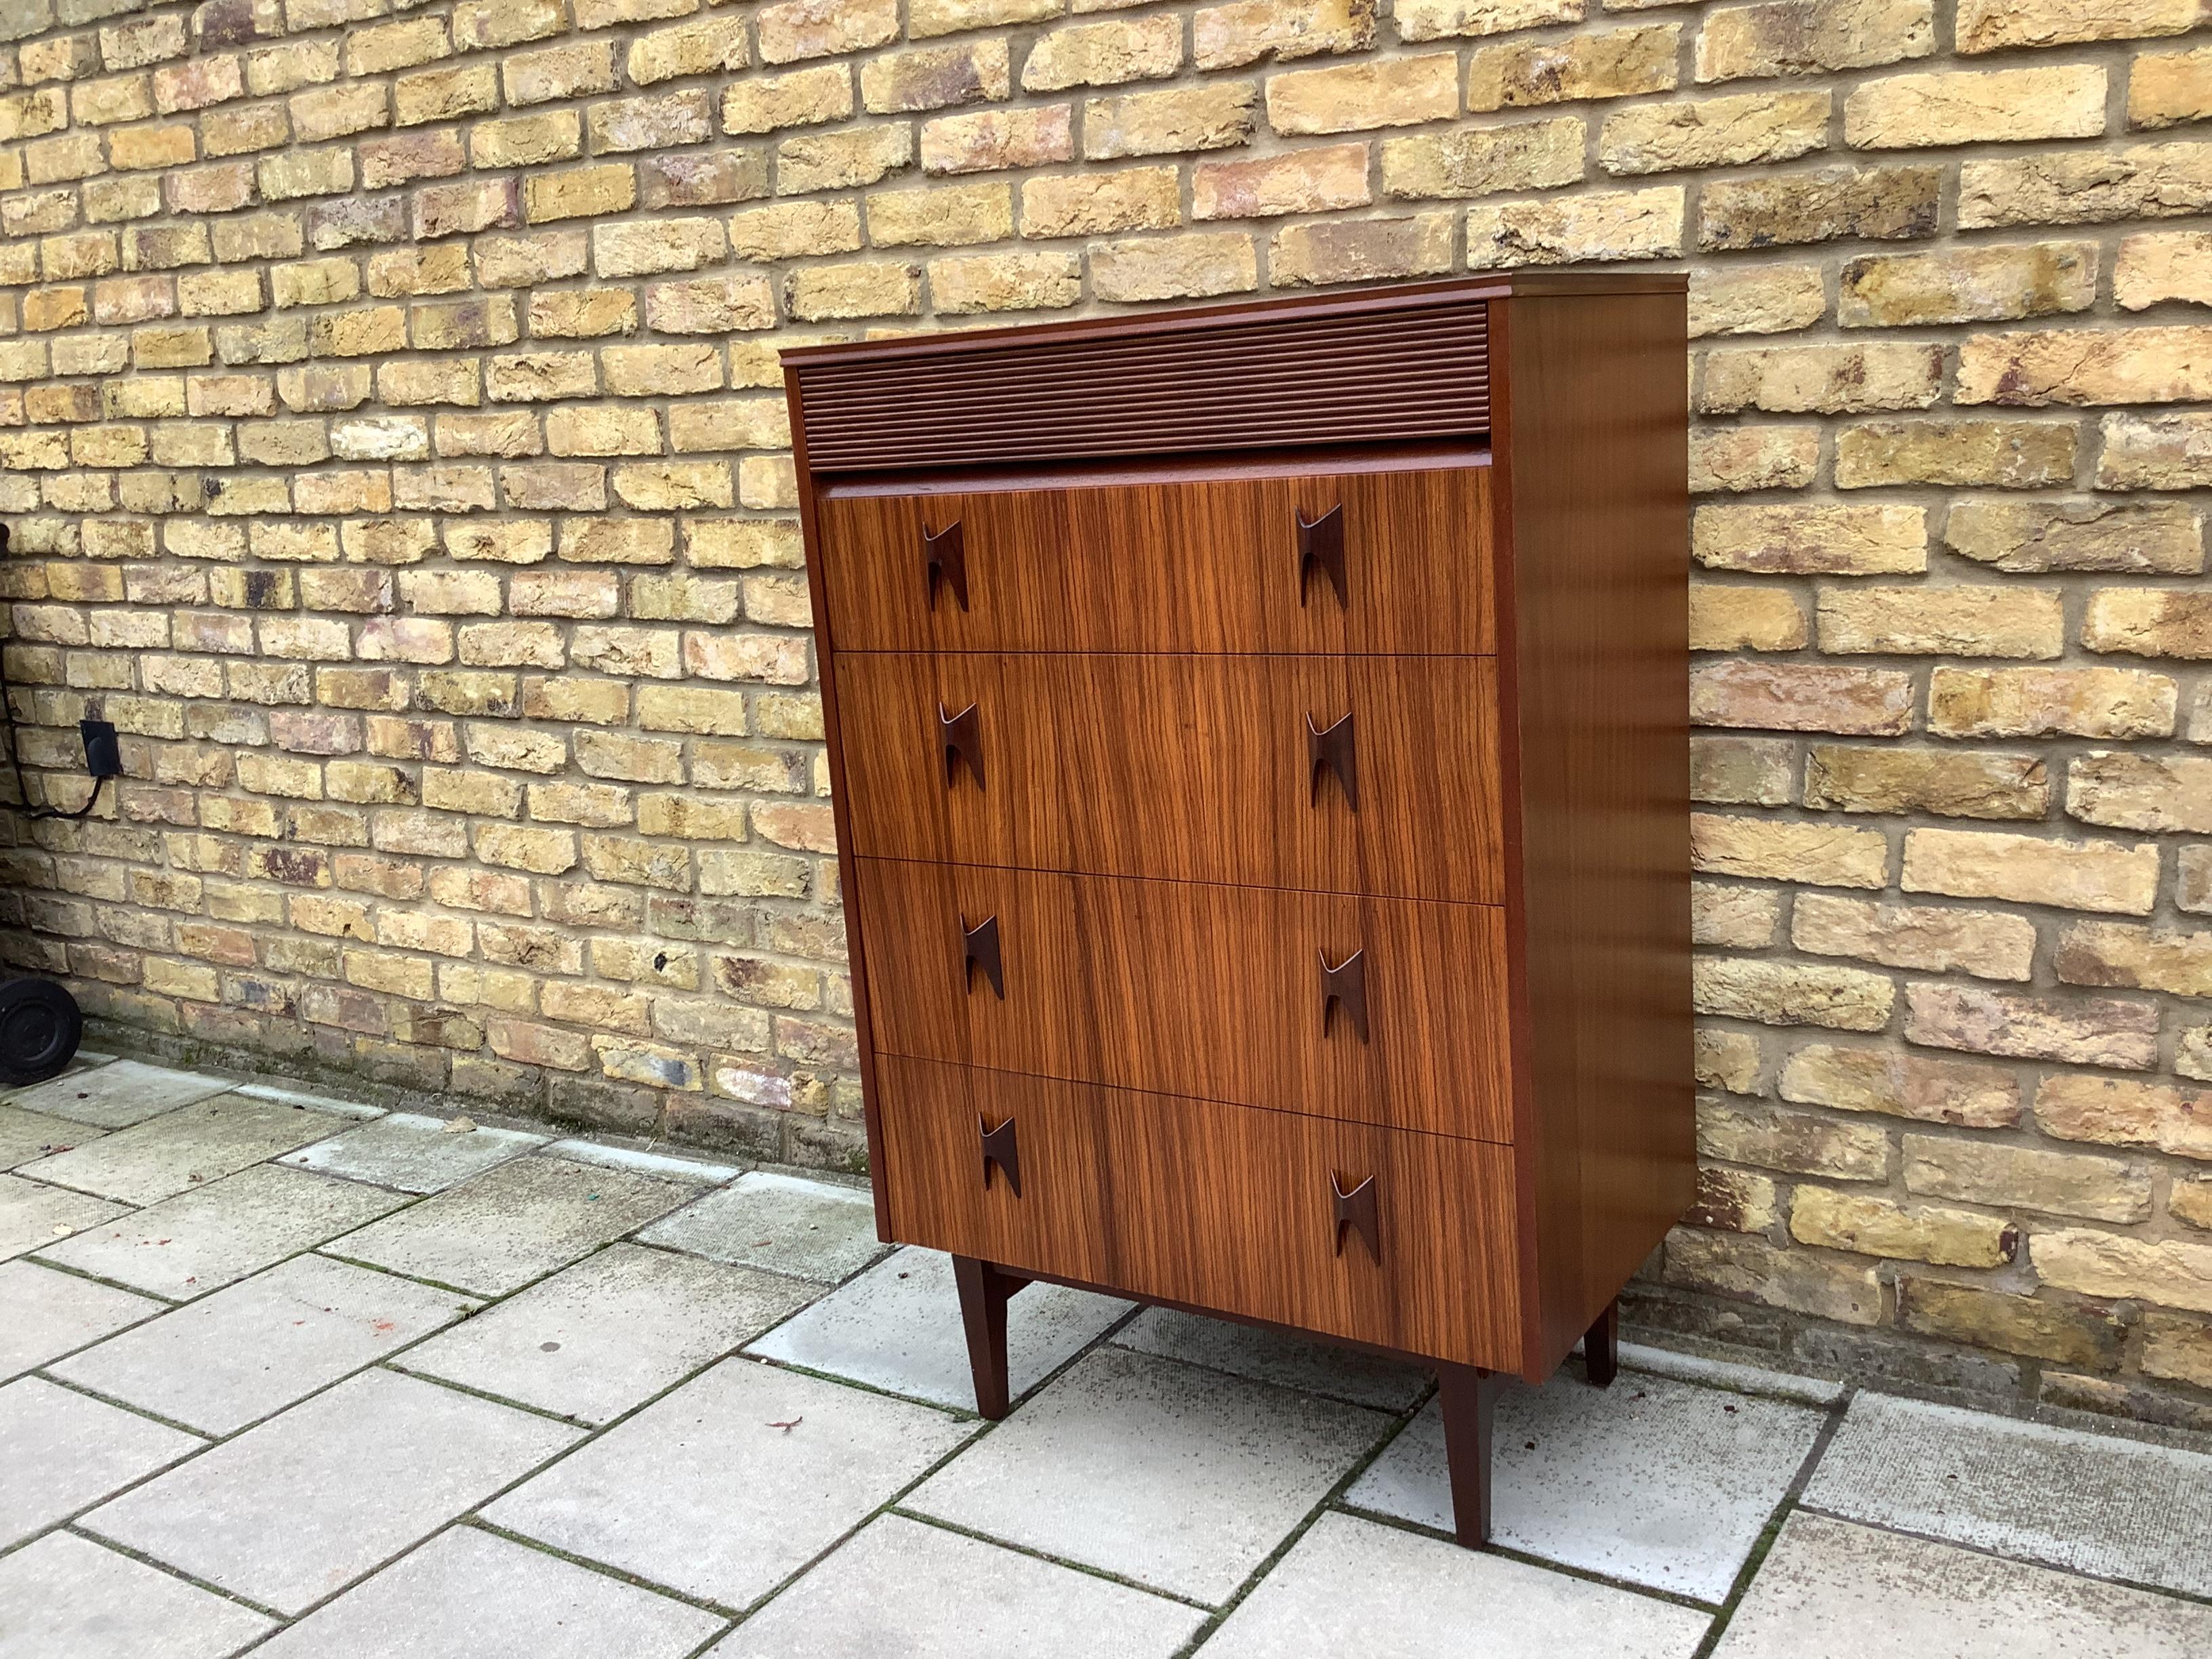 A rare beautiful and very well made vintage chest of drawers, this was made by Elliots of Newbury in the 1960’s. It is made from a fantastic combination of woods, with zebrano drawer fronts, rosewood handles and a walnut frame


Measures: Width –